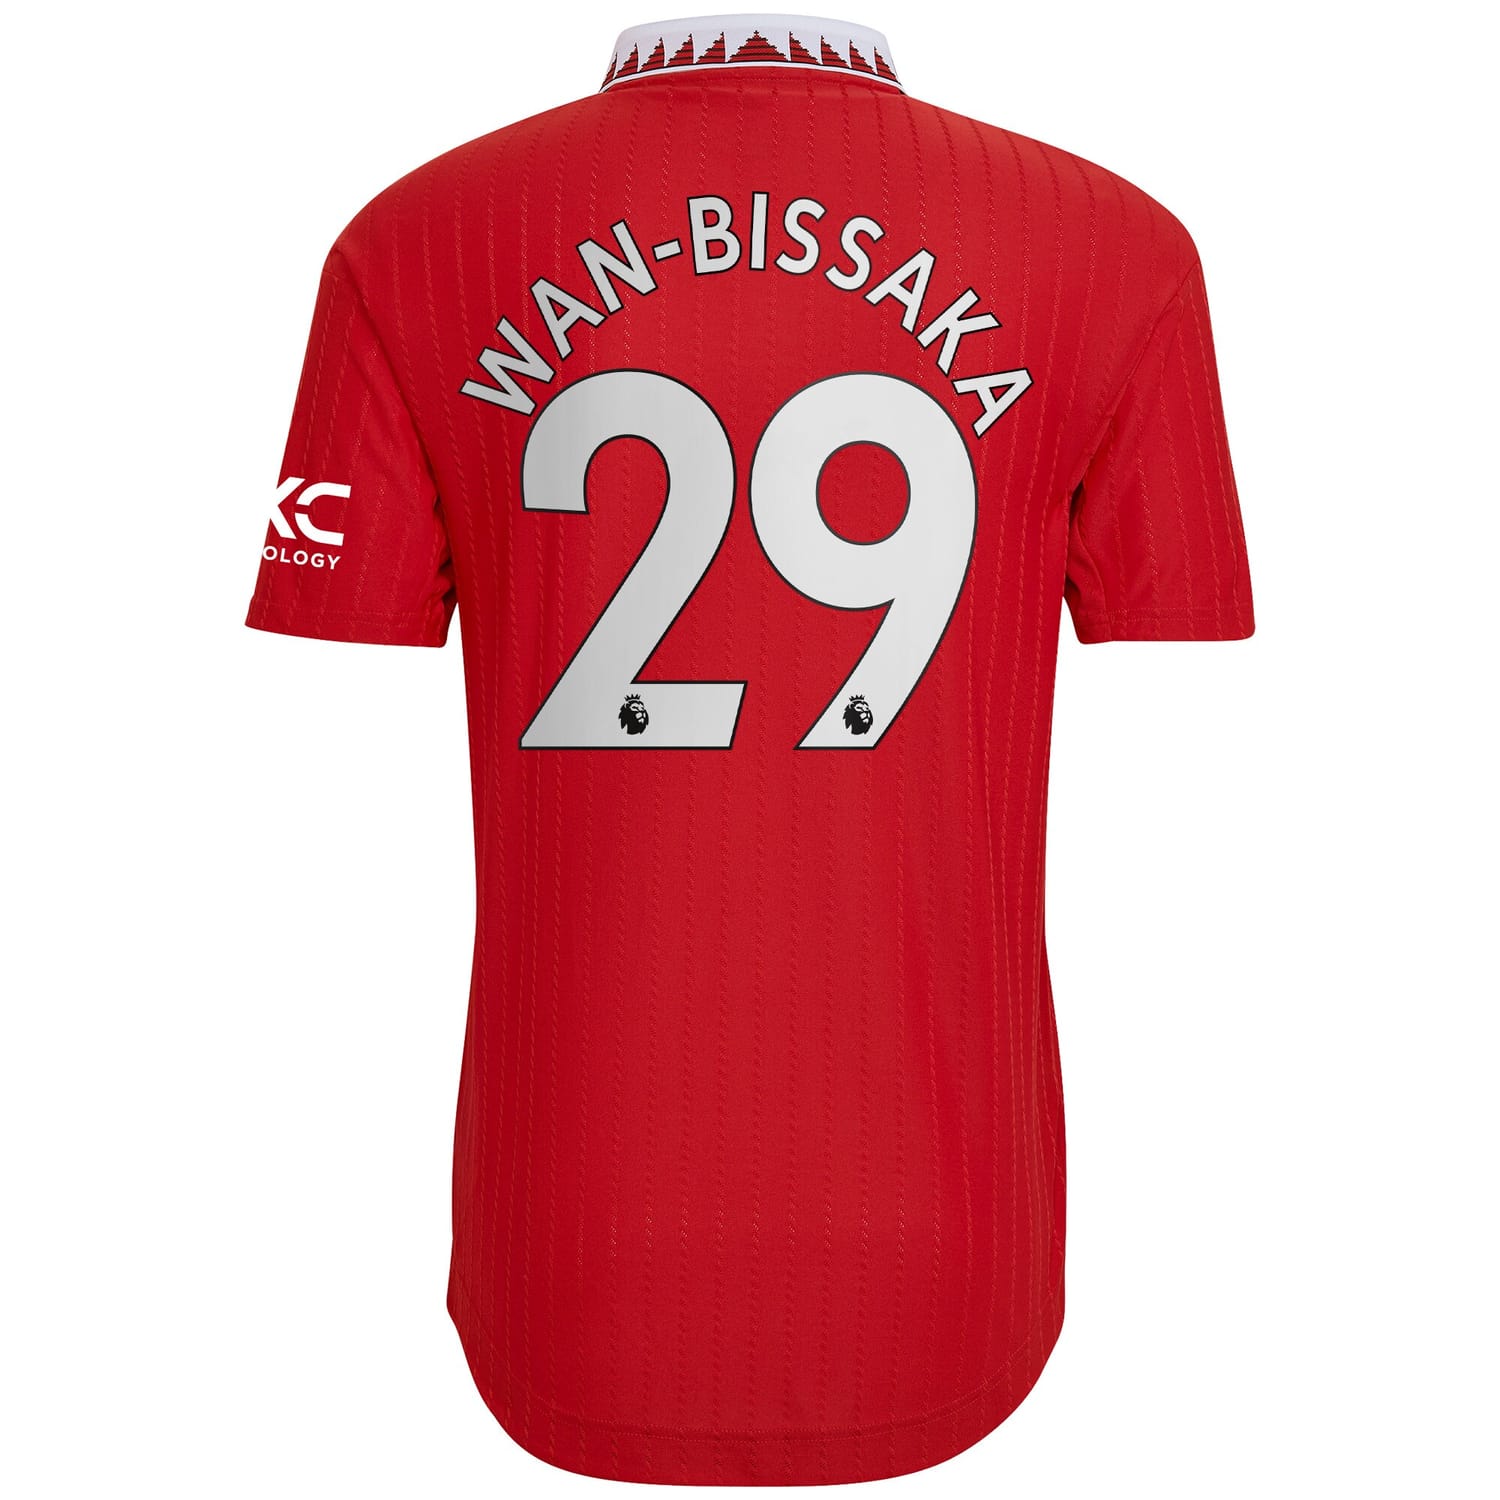 Premier League Manchester United Home Authentic Jersey Shirt 2022-23 player Aaron Wan-Bissaka 29 printing for Men